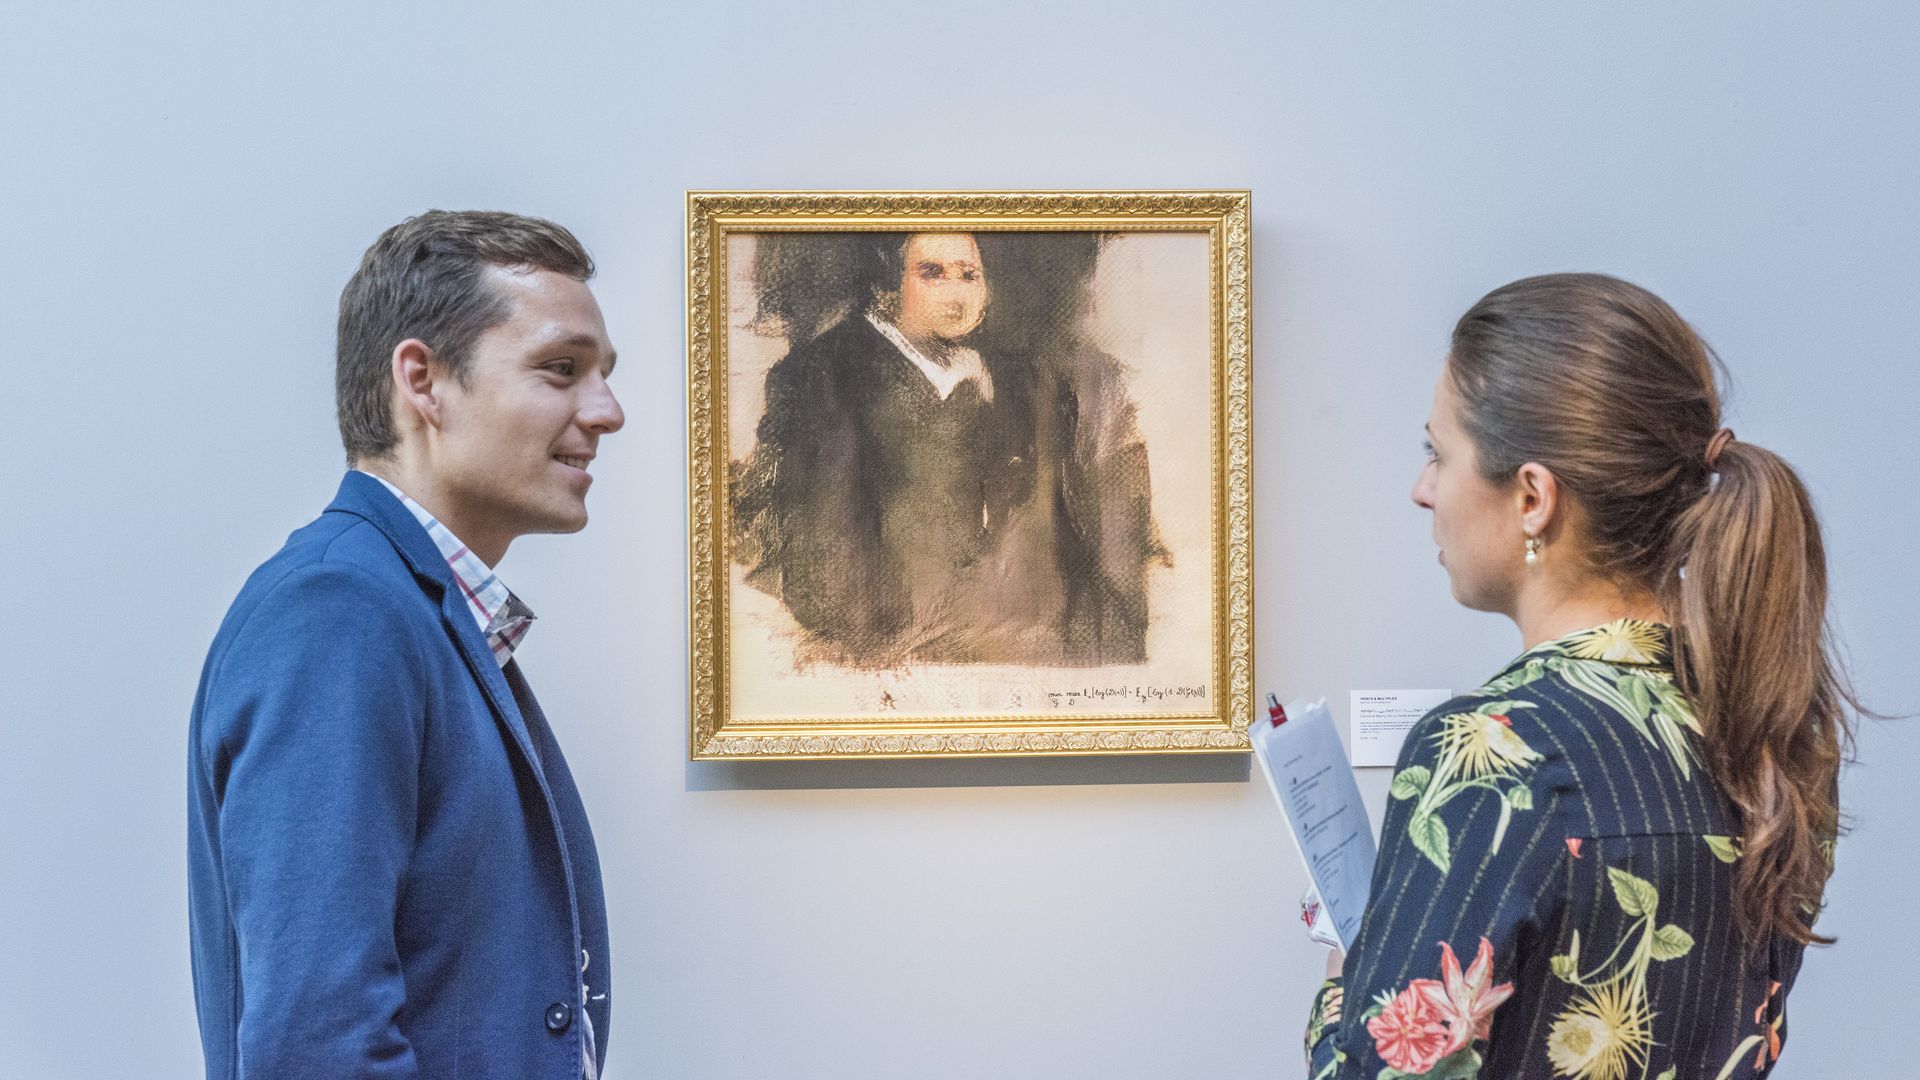 A man and a woman speak to one another in front of an AI-generated portrait in a gallery.